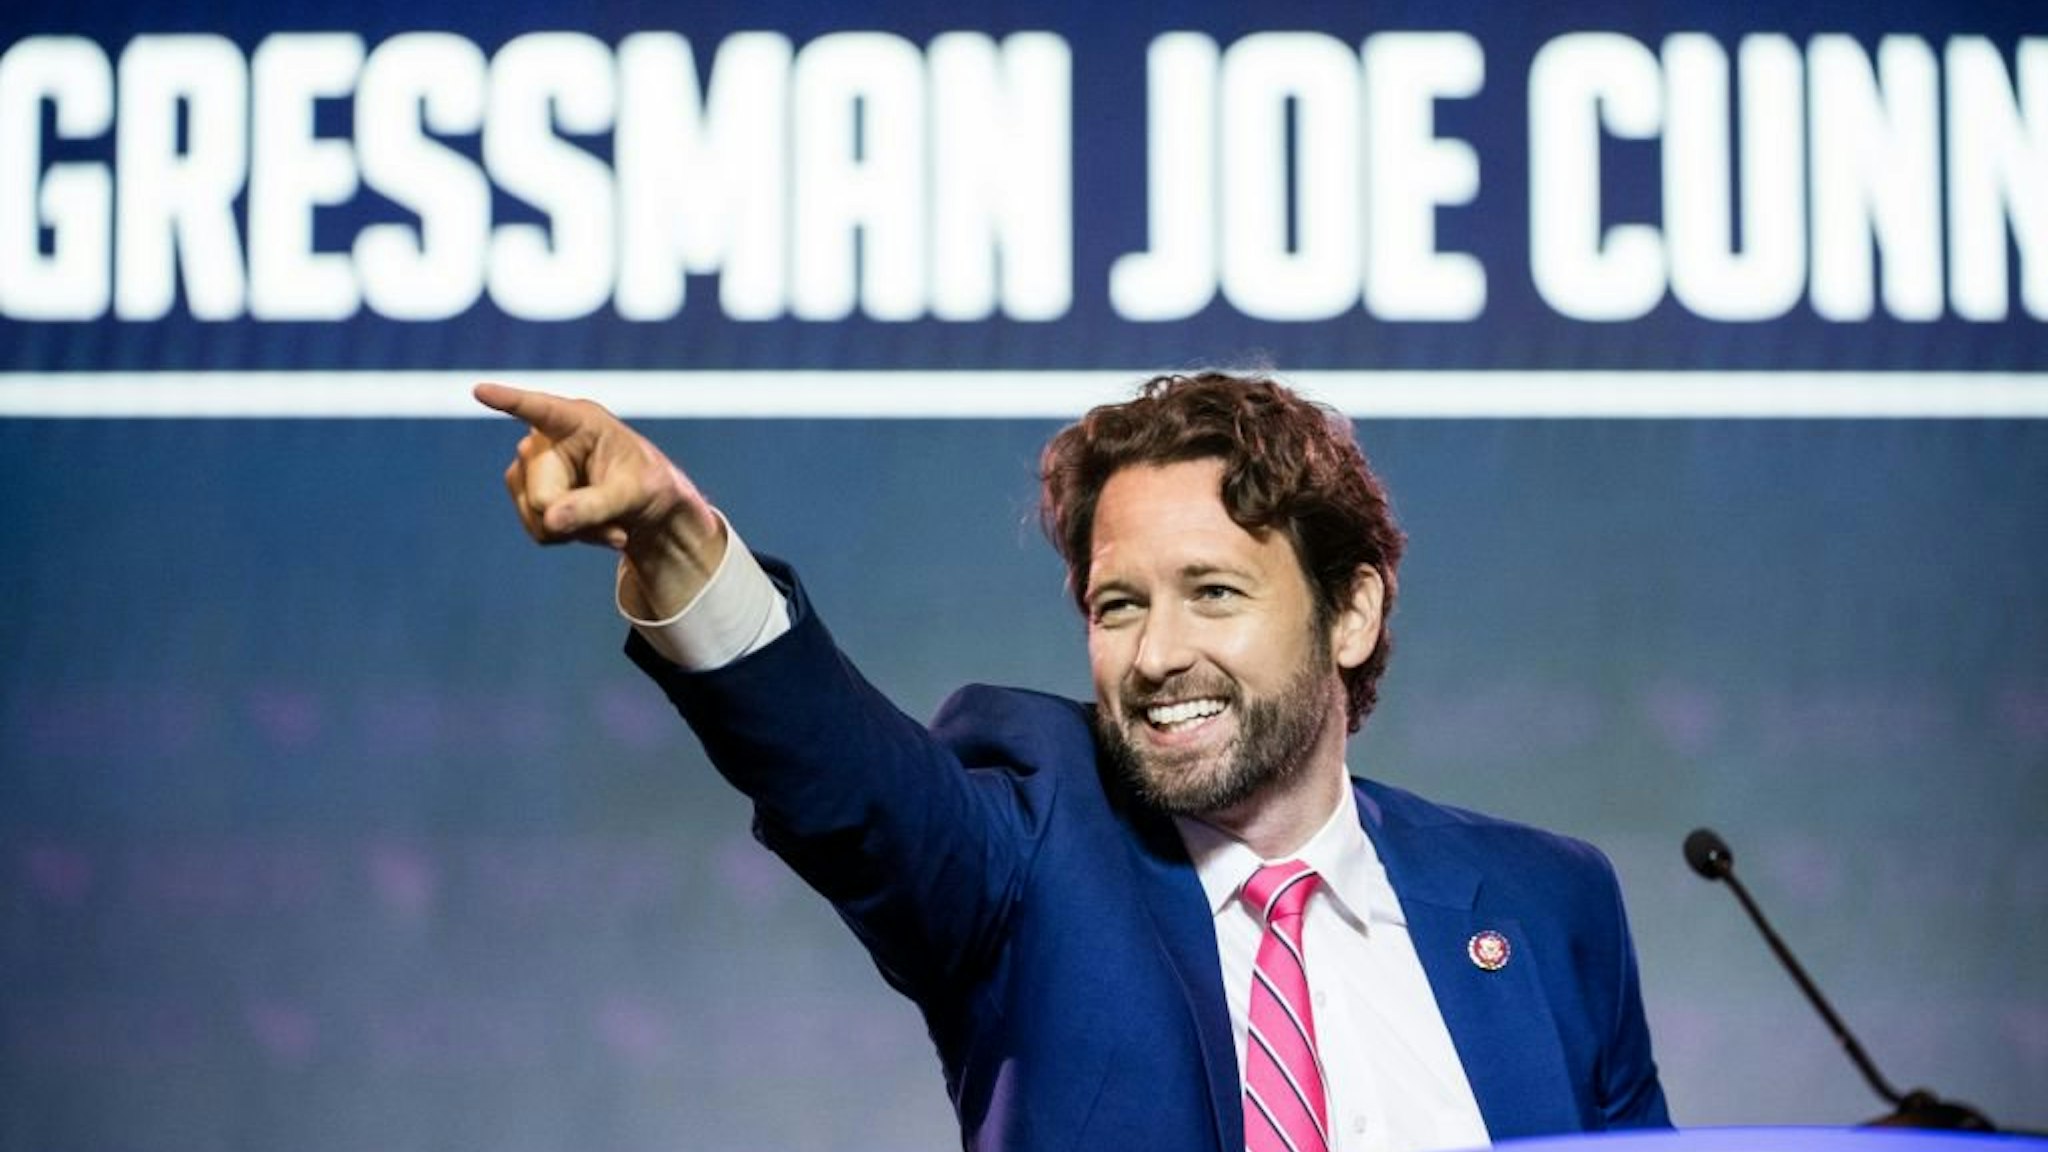 COLUMBIA, SC - JUNE 22: Rep. Joe Cunningham (D-SC) addresses the crowd at the 2019 South Carolina Democratic Party State Convention on June 22, 2019 in Columbia, South Carolina. Democratic presidential hopefuls are converging on South Carolina this weeken